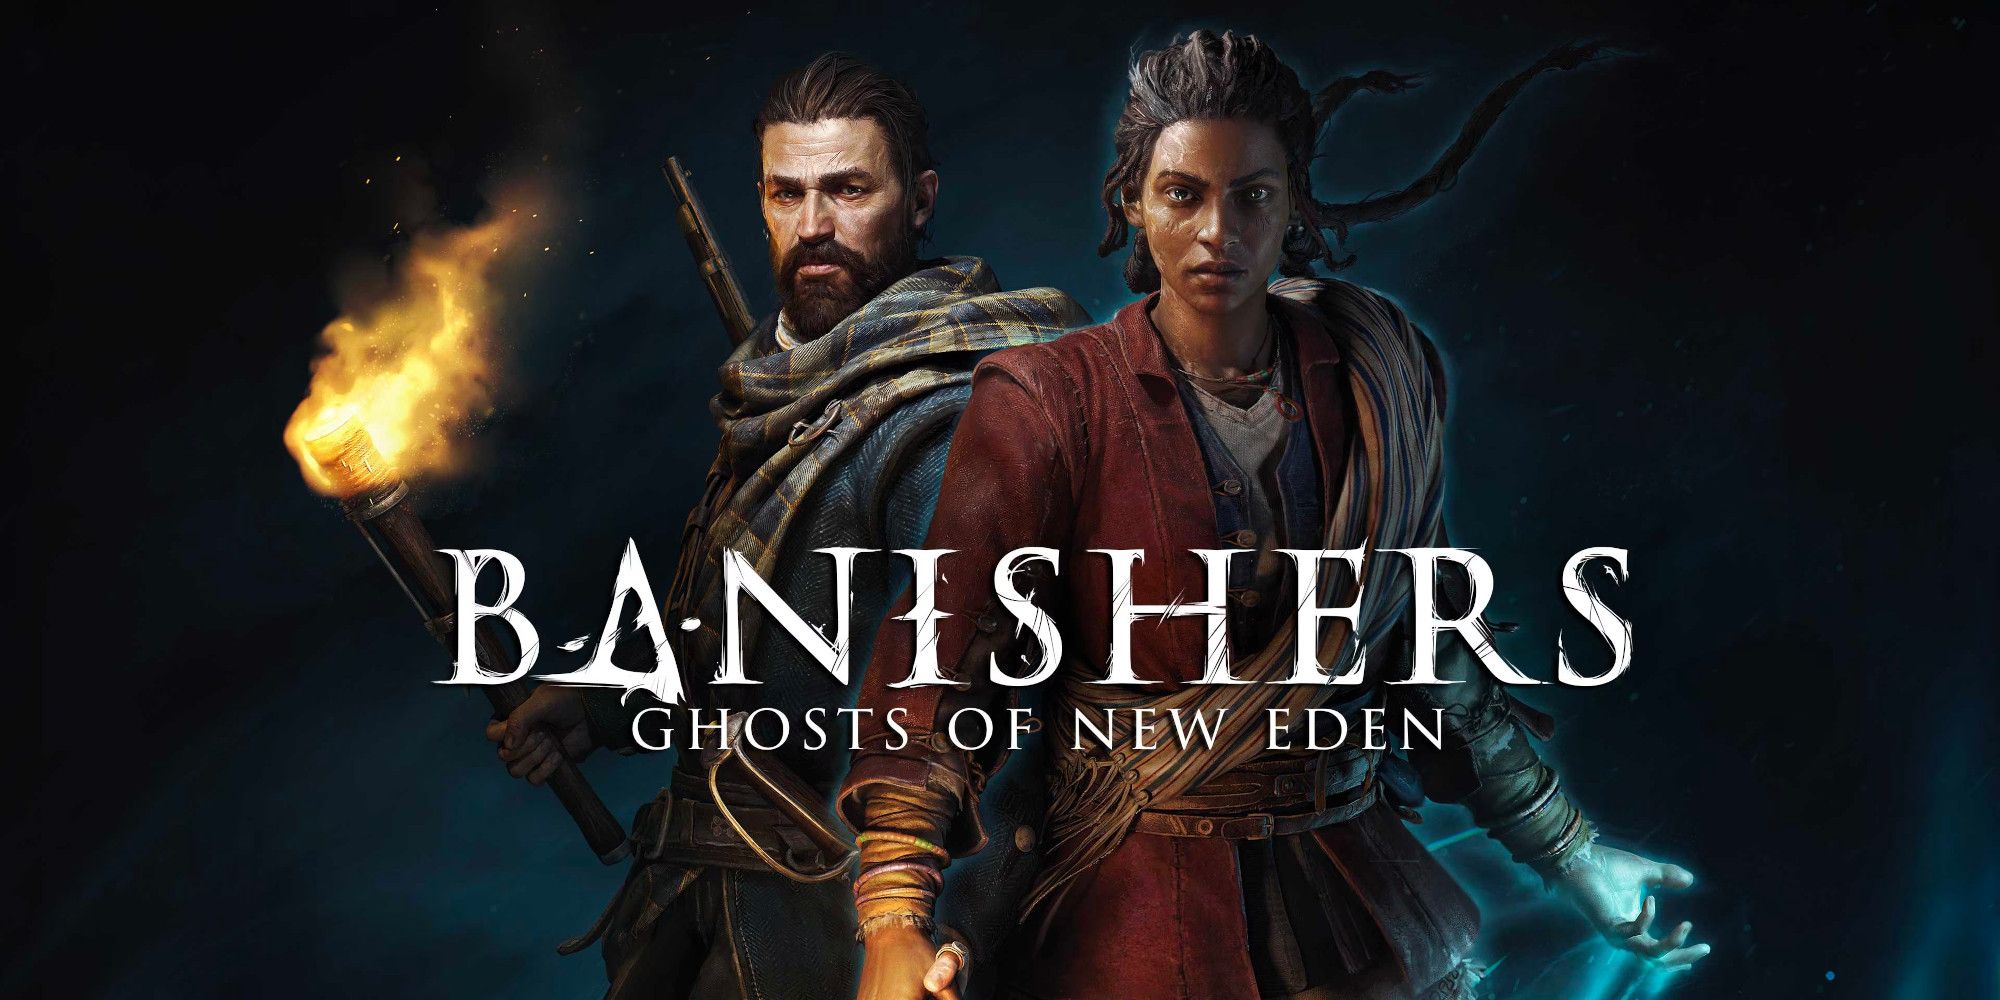 Banishers Ghosts of New Eden Review Art